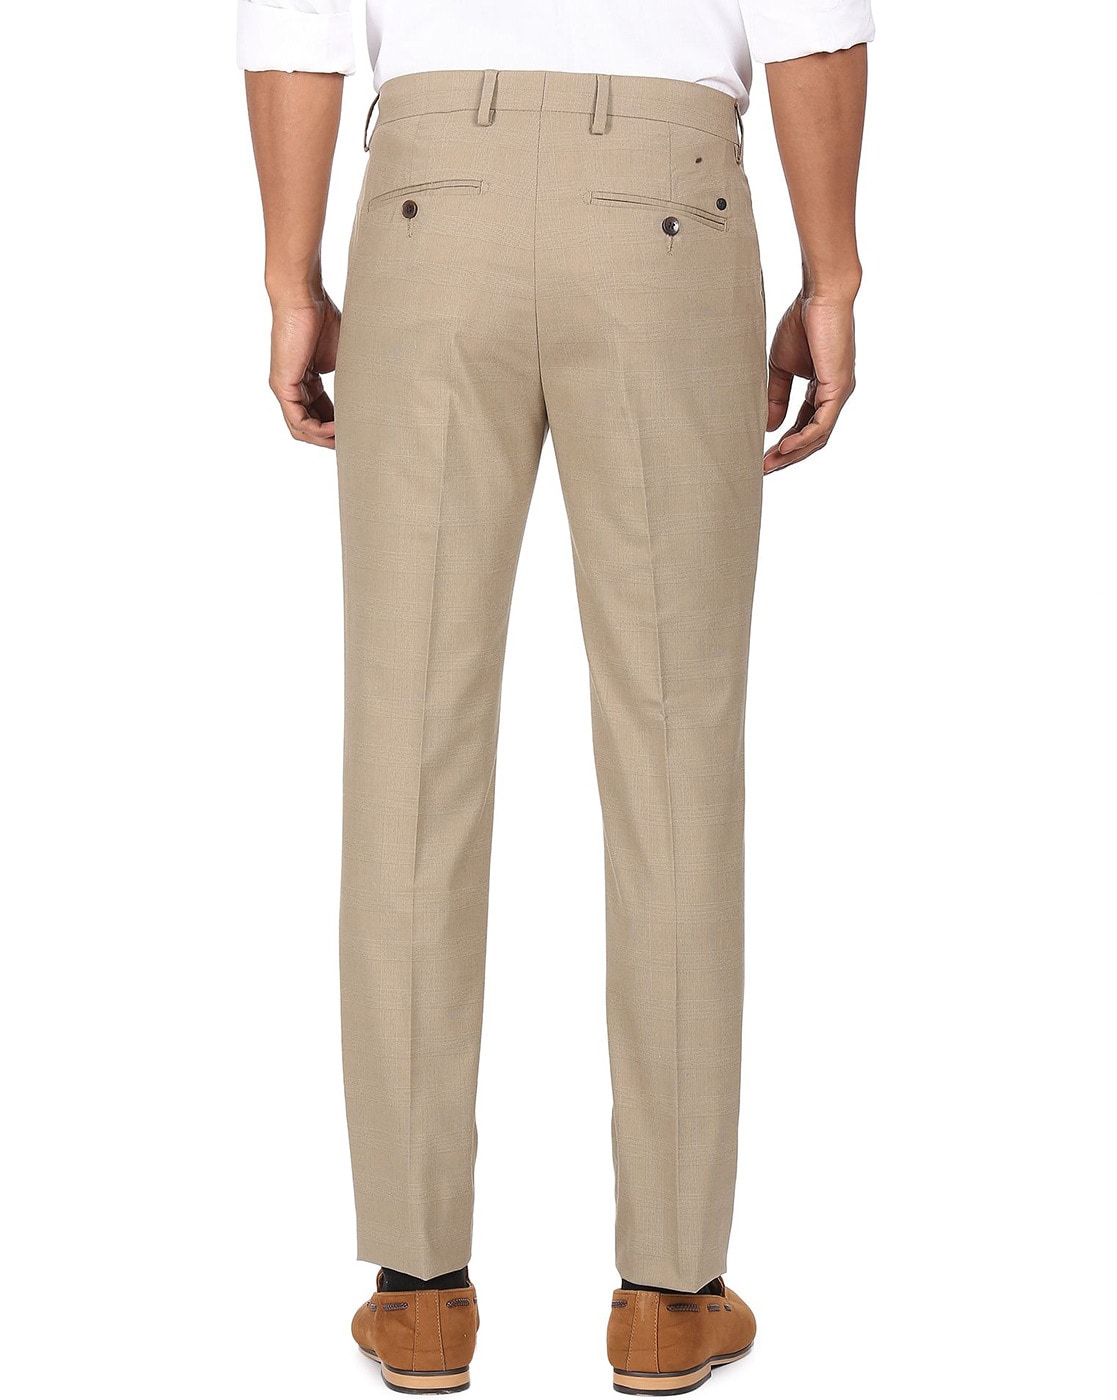 Chino trousers for men: Best-selling chino trousers for men under Rs.700 -  The Economic Times